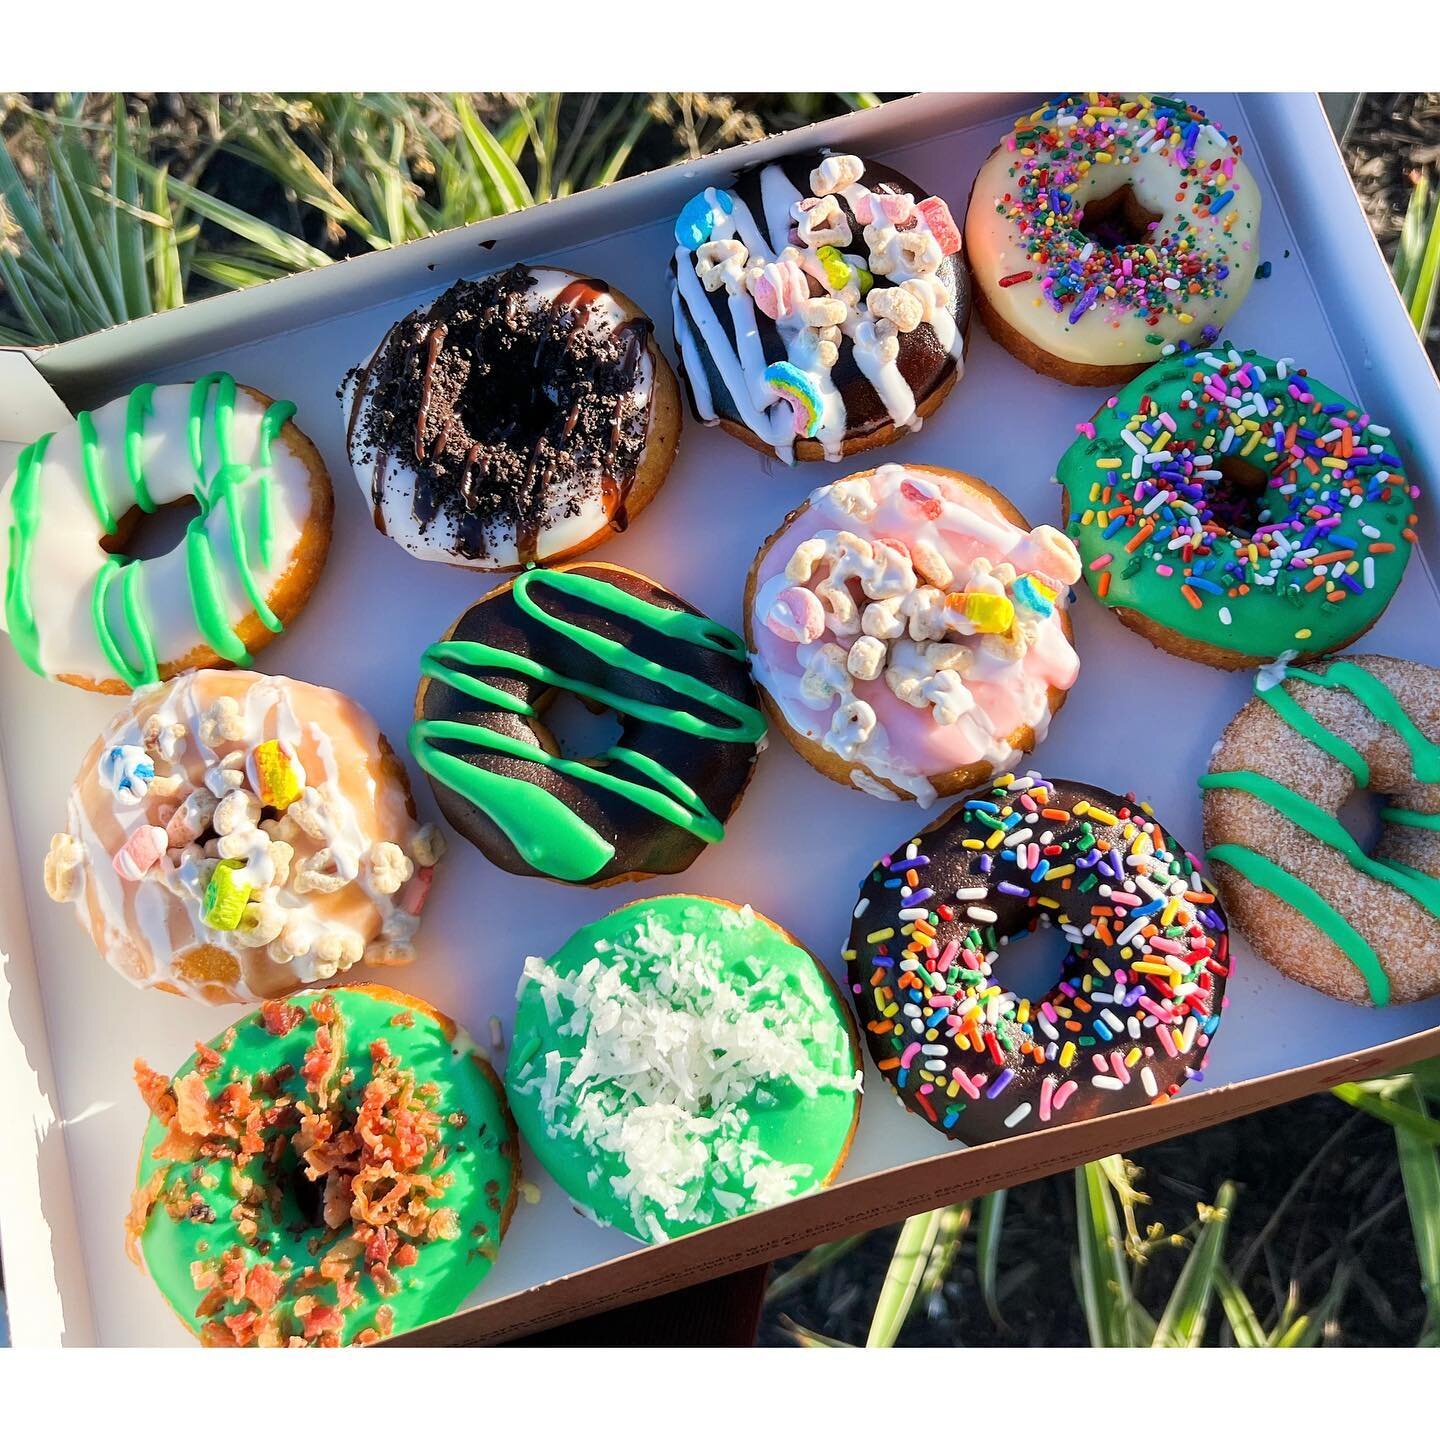 Happy #saintpatricksday ☘️ 

Get lucky with this @duckdonuts assortment, available until tomorrow 🦆🍩☘️